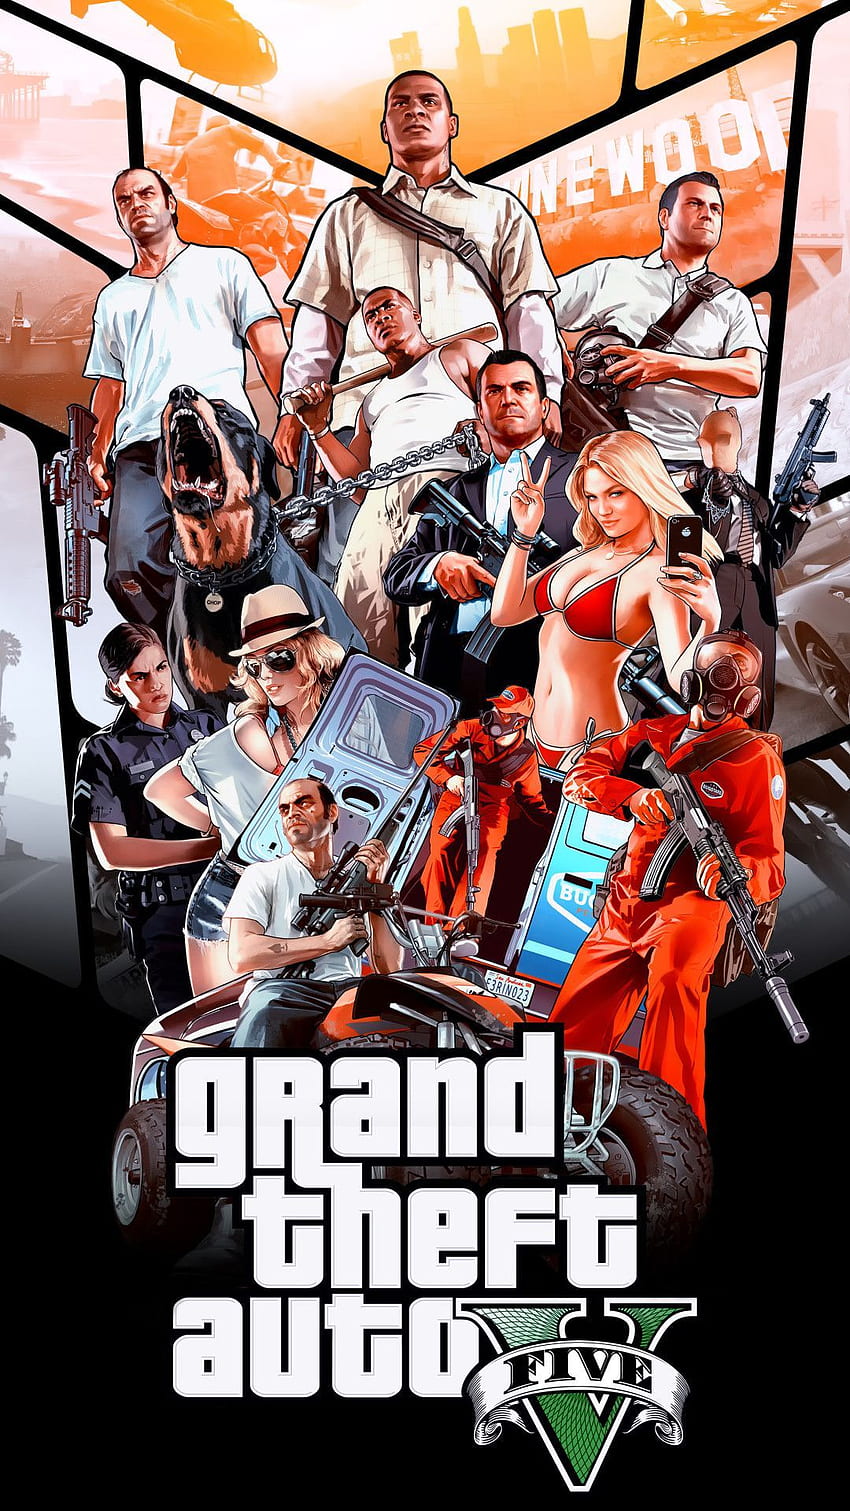 Gta V Poster Mobile (iPhone, Android, Samsung, Pixel, Xiaomi) in 2020. Grand Theft Auto, Grand Theft Auto 아트워크, Grand Theft Auto 시리즈 HD 전화 배경 화면